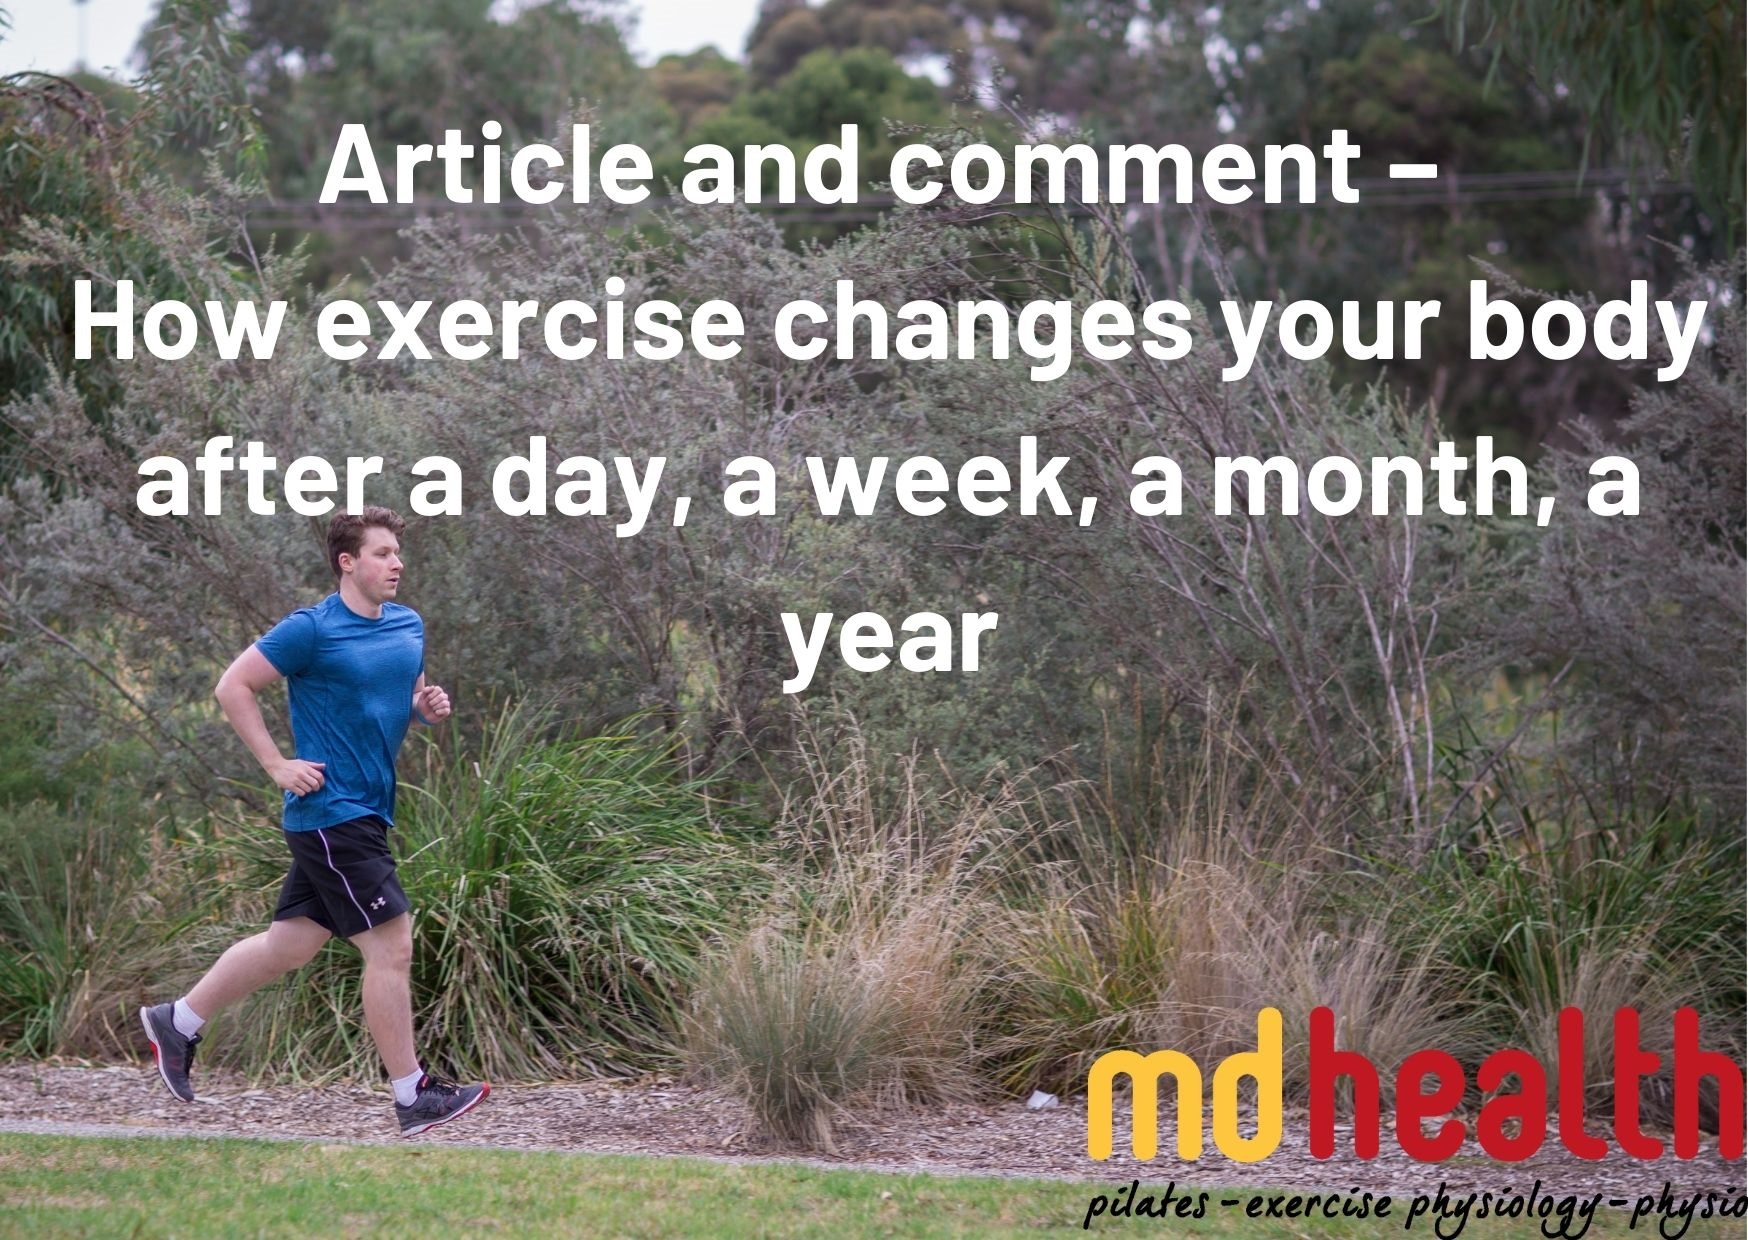 How Exercise Changes Your Body After a Day, a Week, a Month, a Year